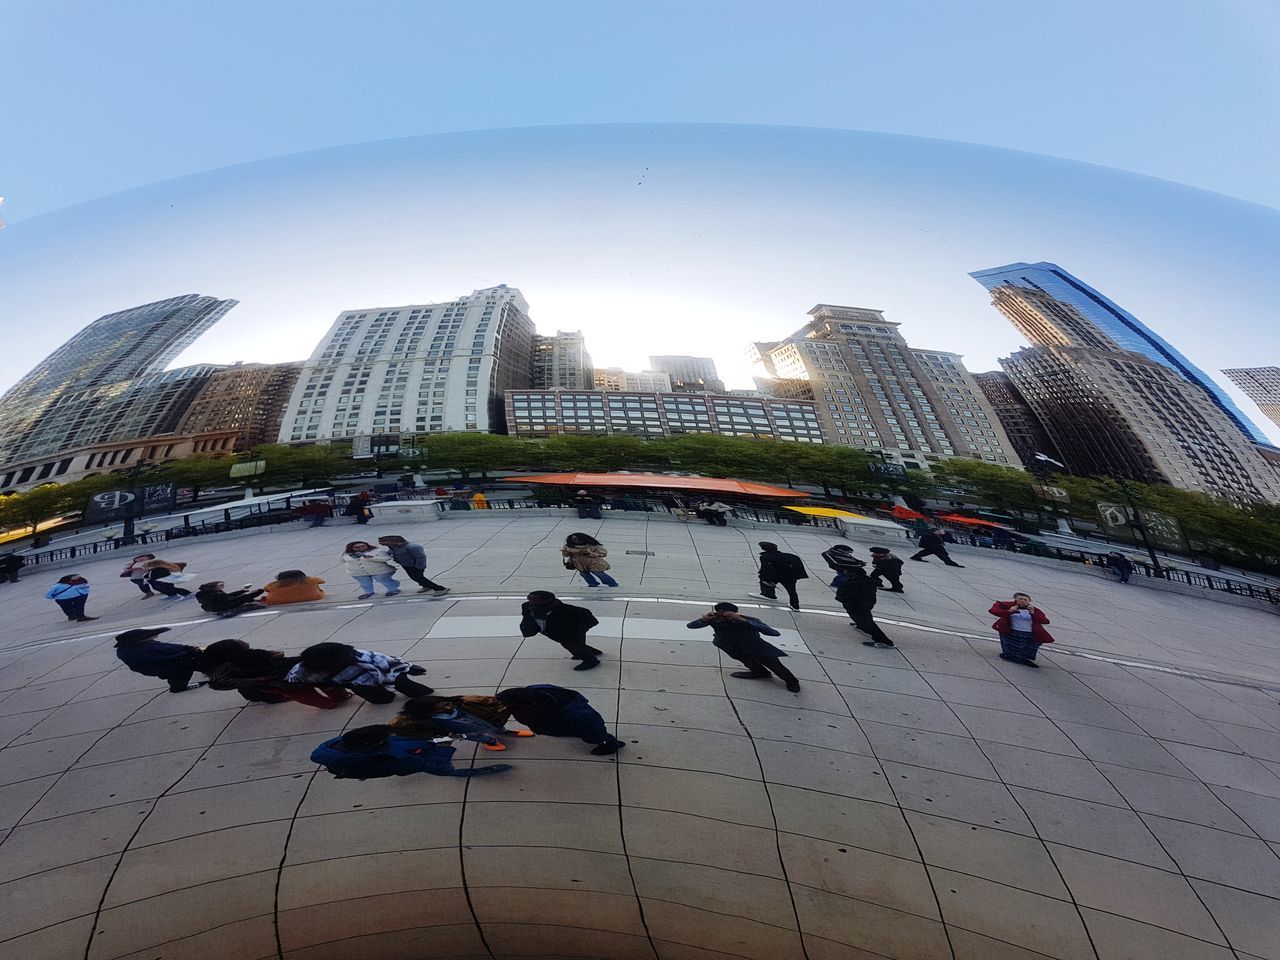 architecture, built structure, large group of people, real people, leisure activity, building exterior, lifestyles, city life, skyscraper, men, city, modern, travel destinations, day, indoors, women, fish-eye lens, ice rink, sky, people